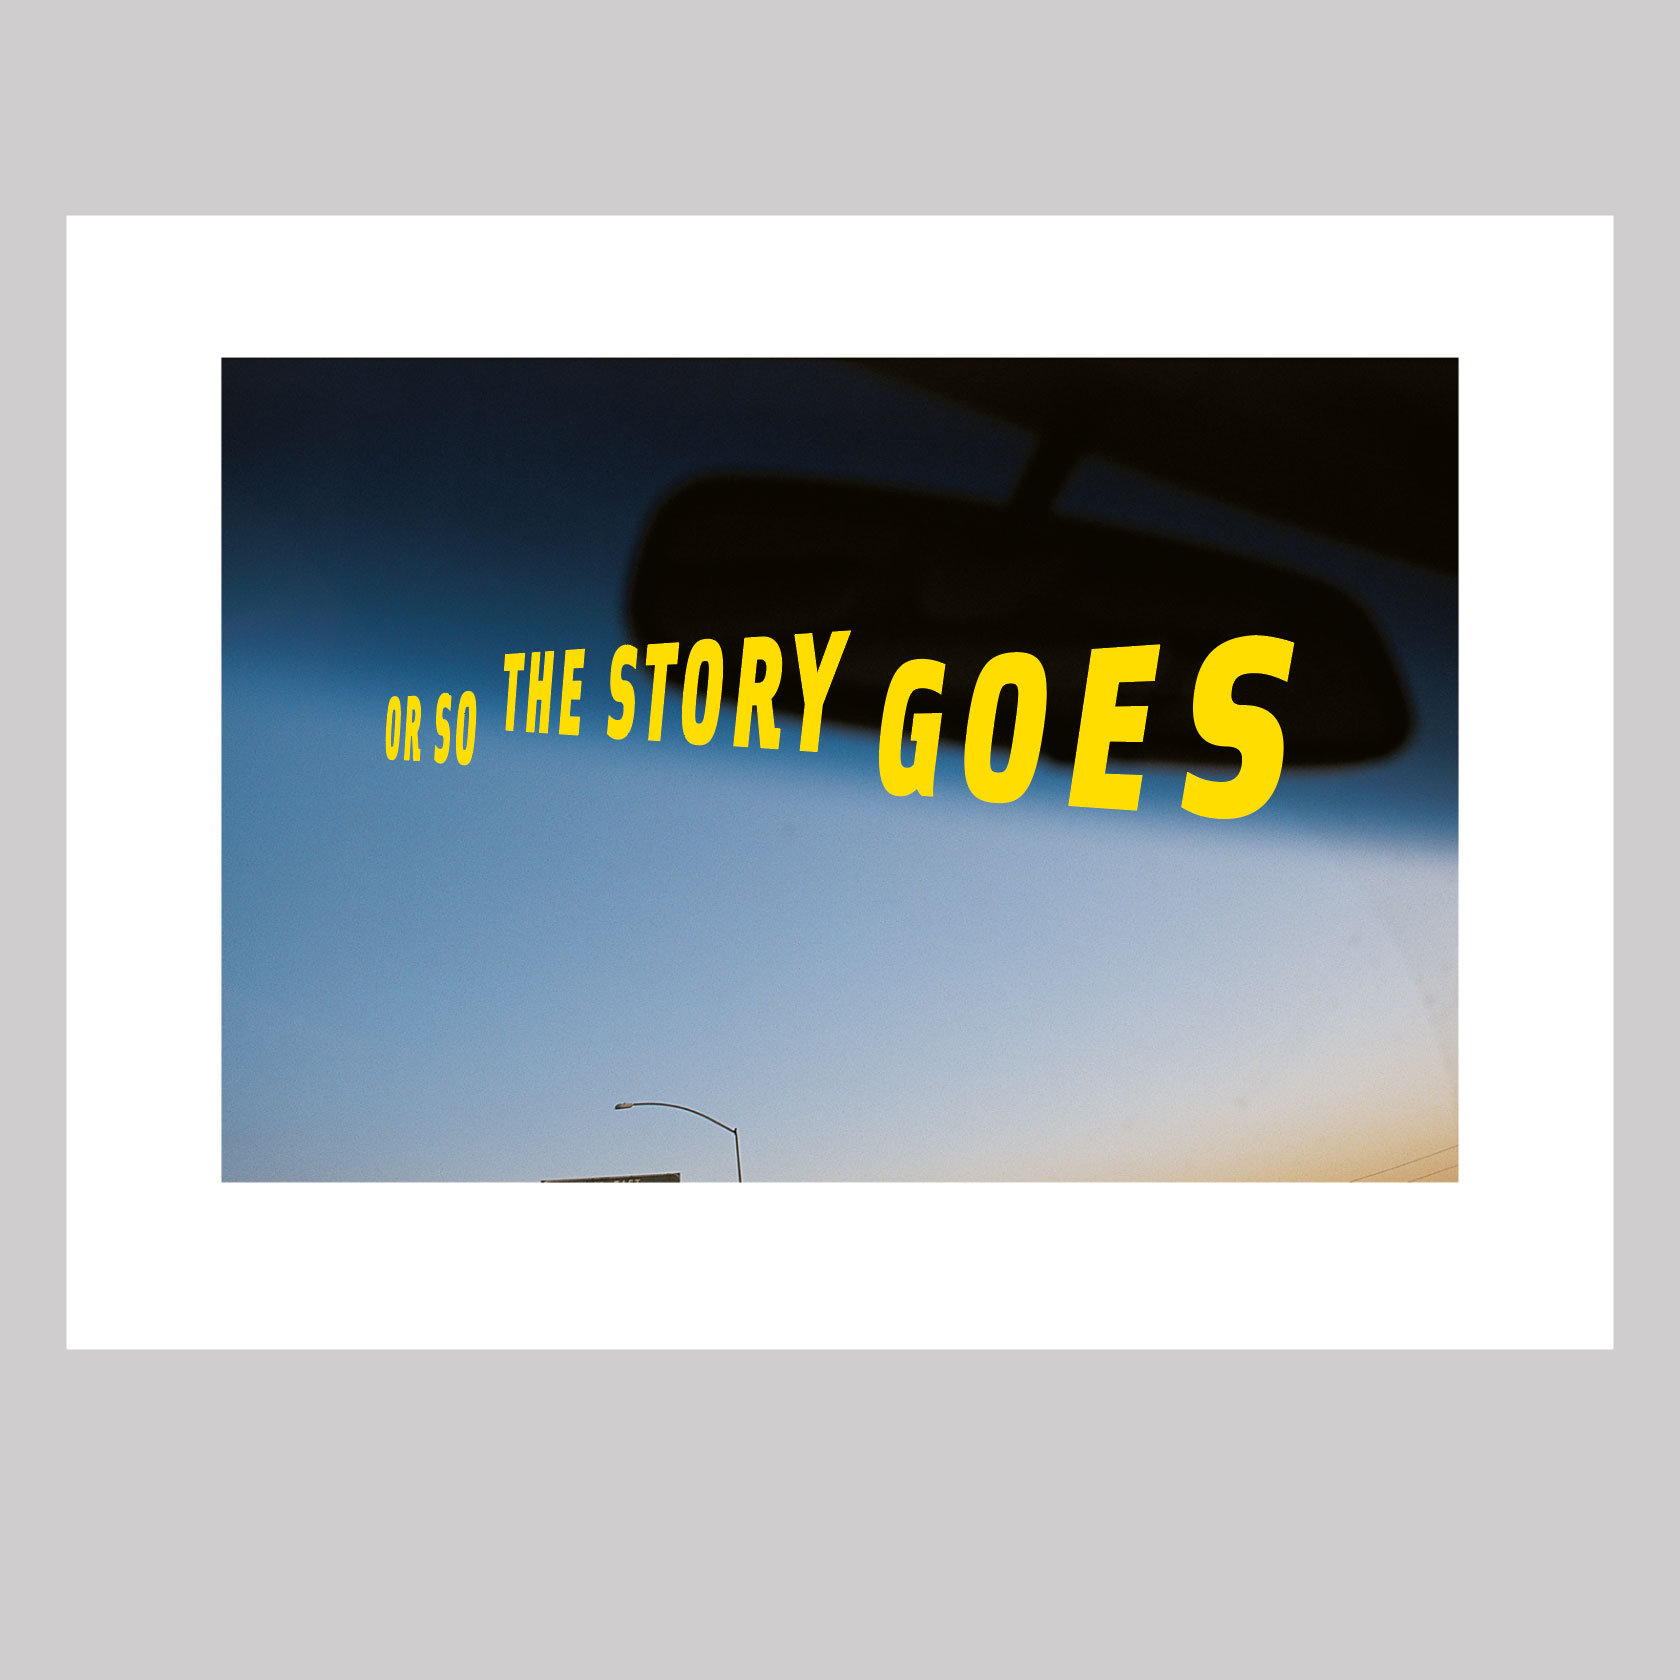 Or so the Story Goes (Digital Print)